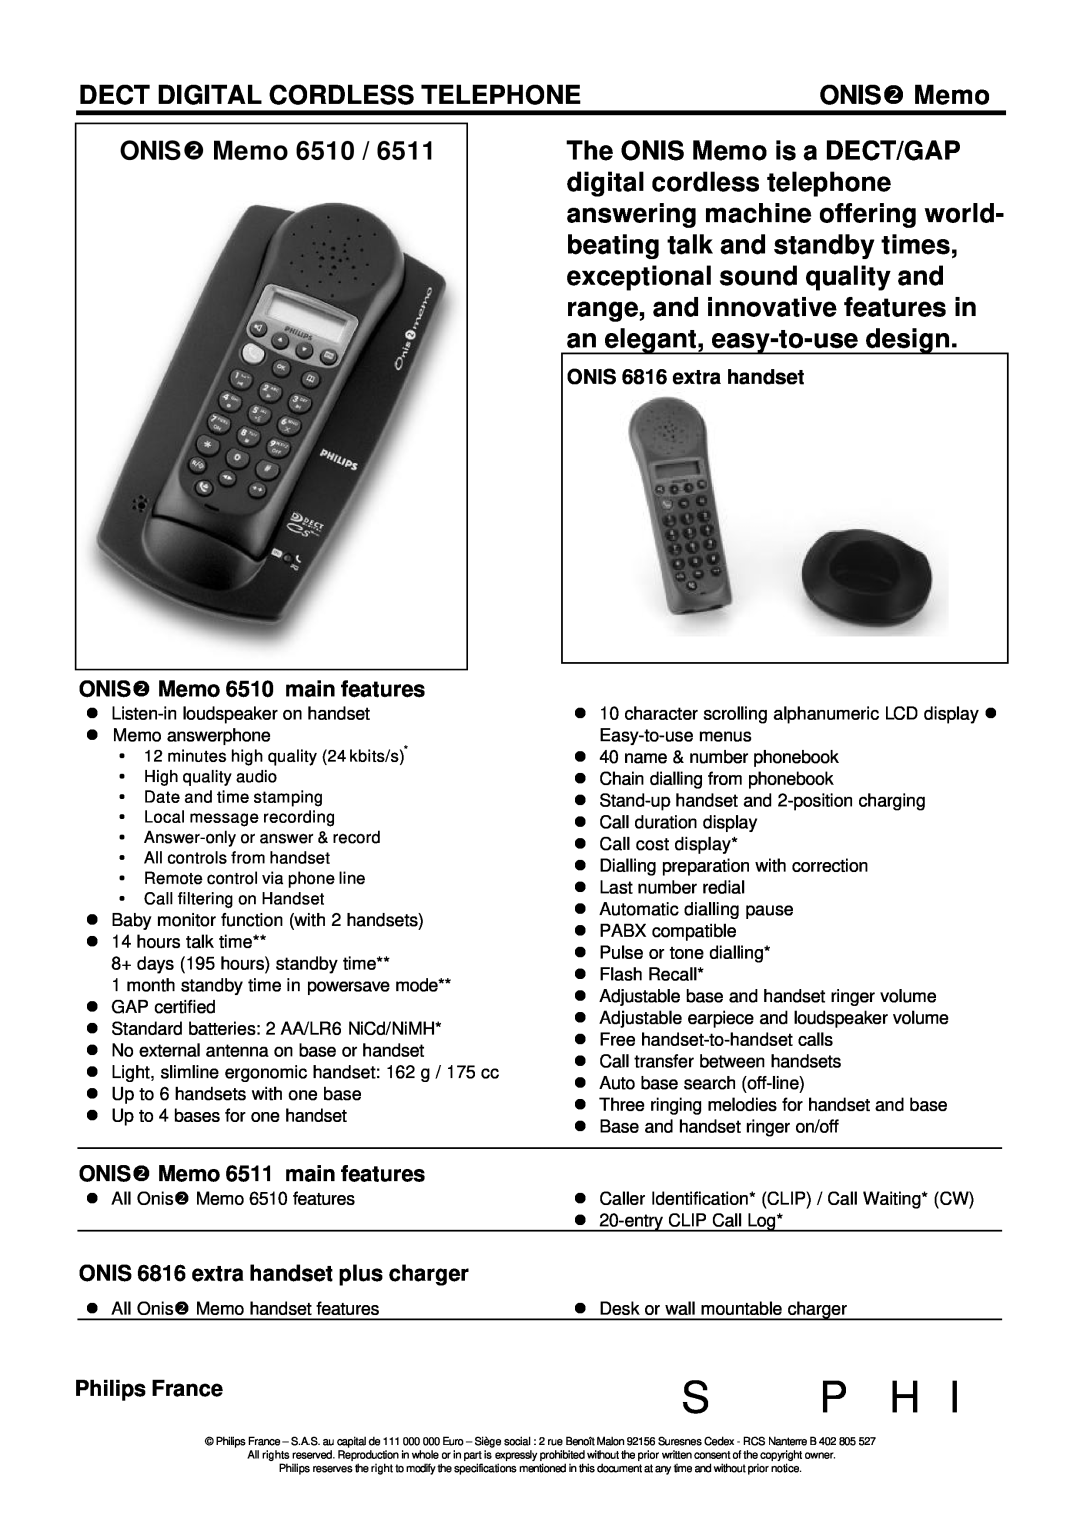 Philips 6511 specifications S Phi, Dect Digital Cordless Telephone, ONIS Memo 6510 main features, Philips France 